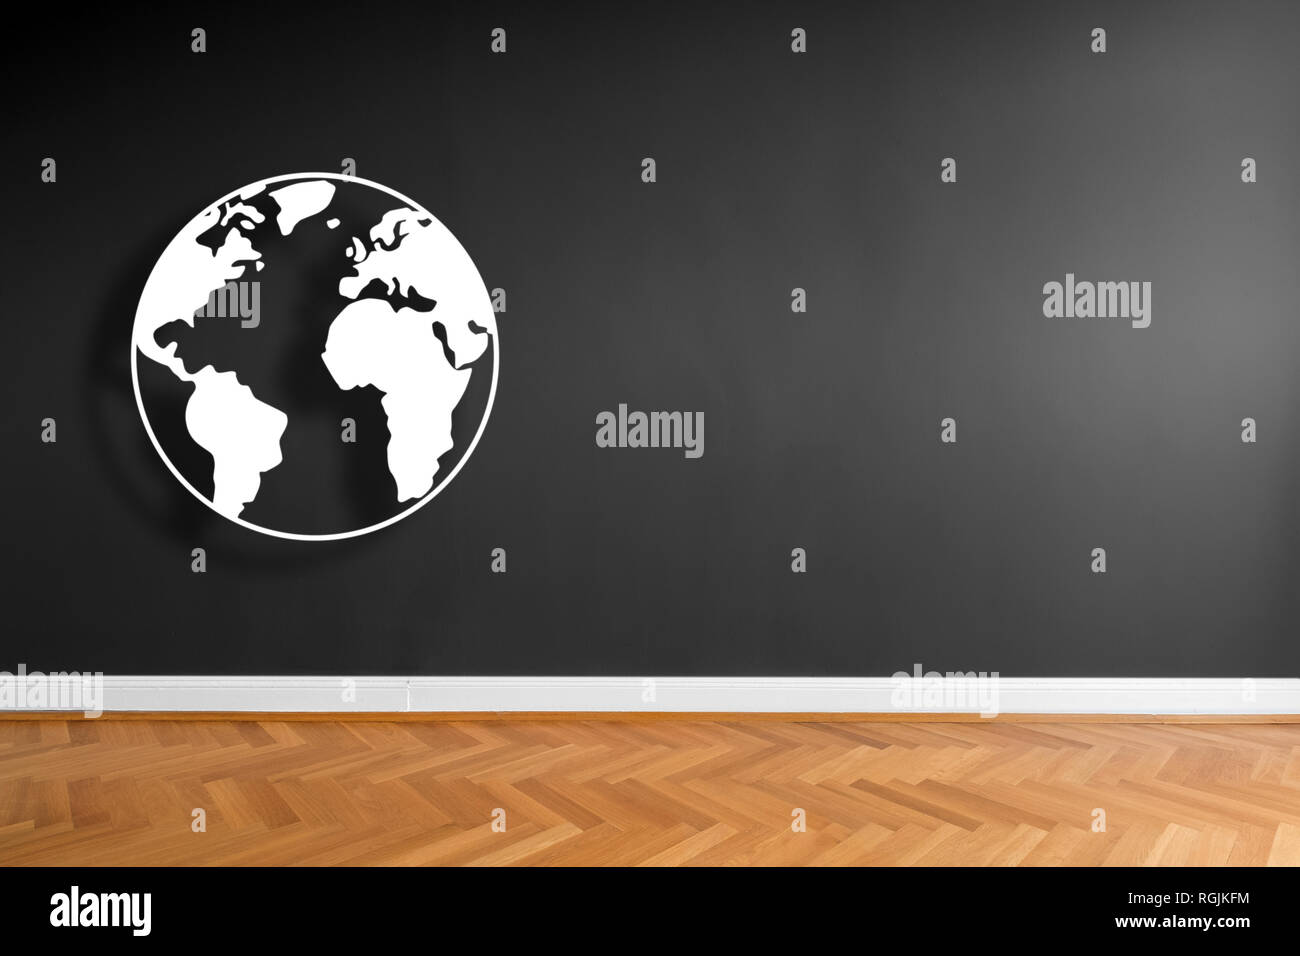 world illustration / earth graphic on wall background in empty room Stock Photo